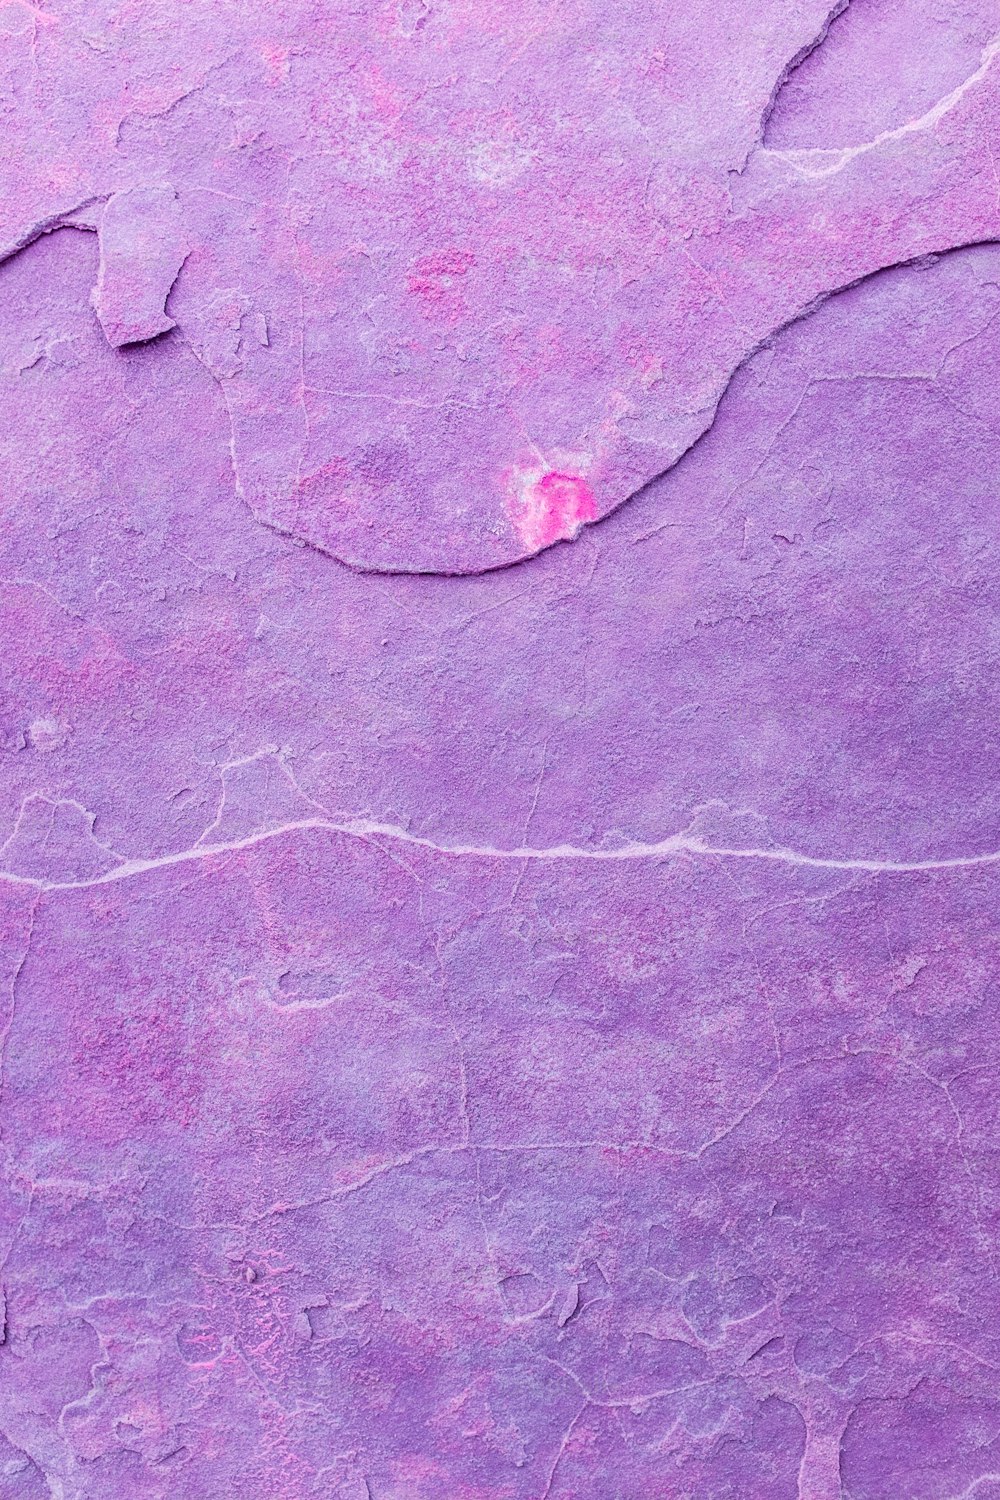 a close up of a purple surface with a small hole in the middle